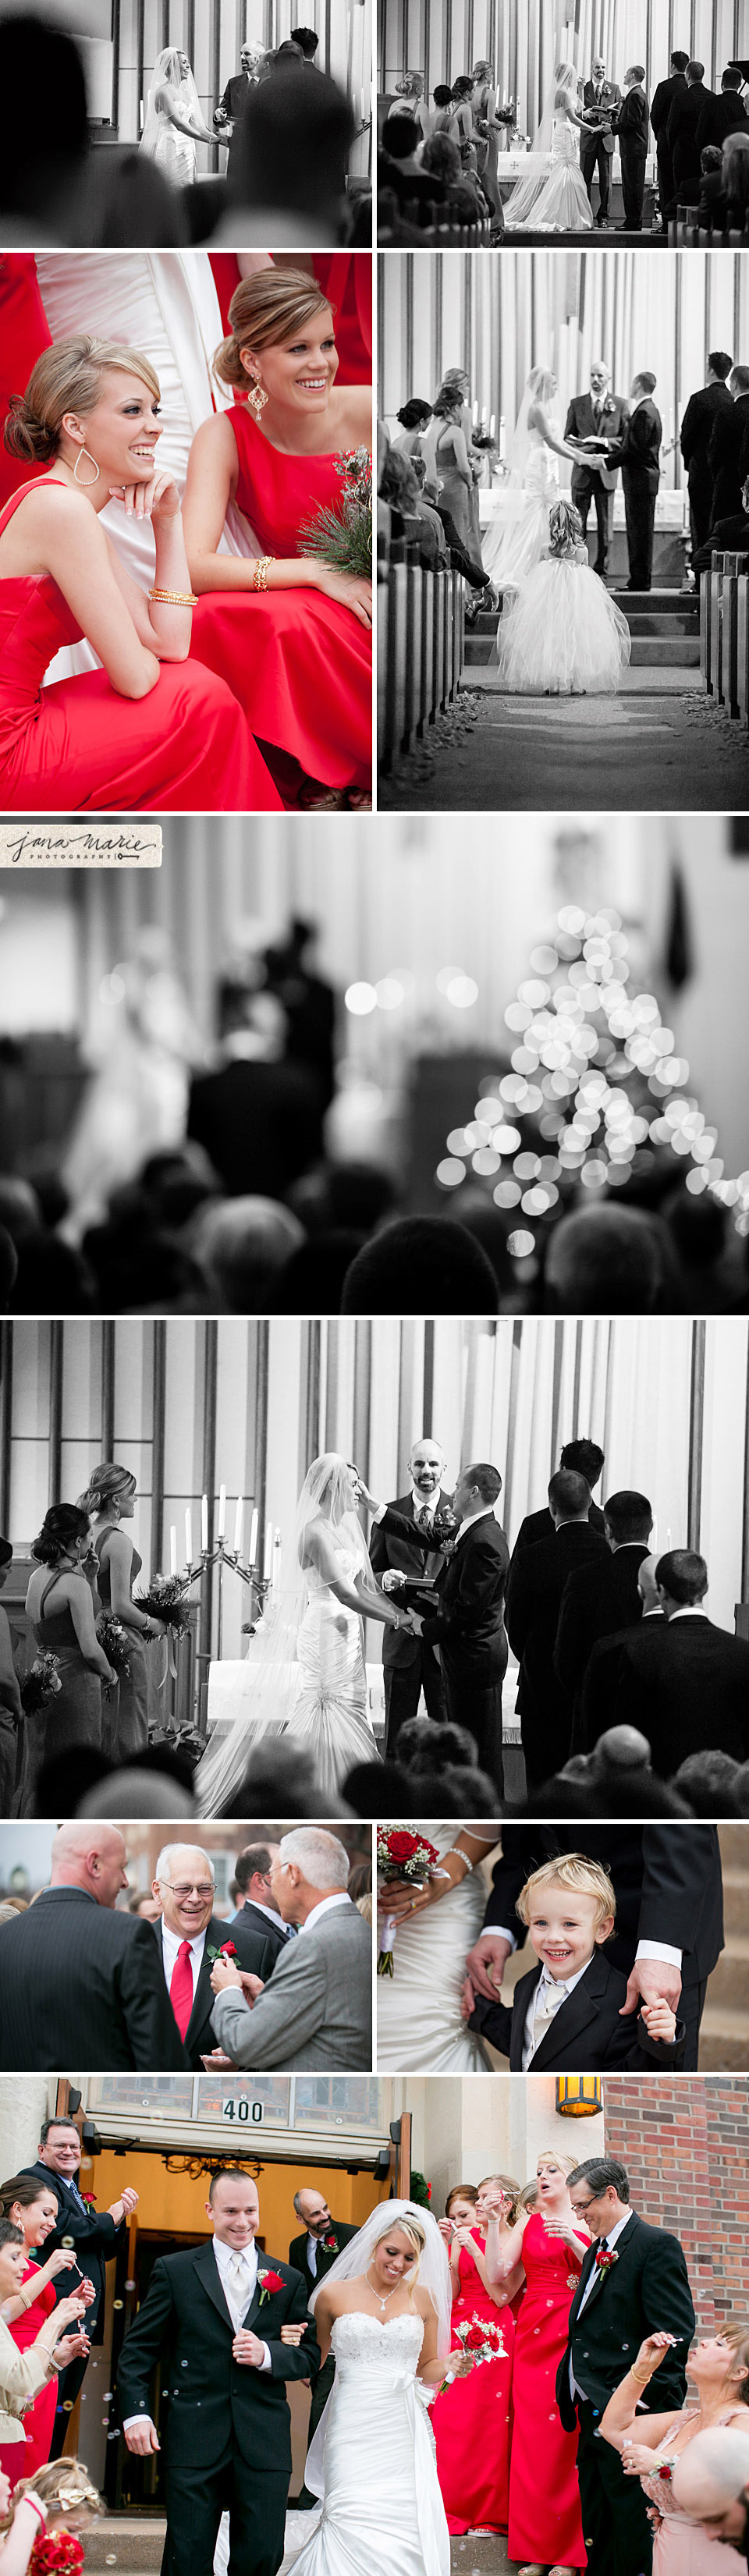 black and white photography, Independence weddings, Bubble exit